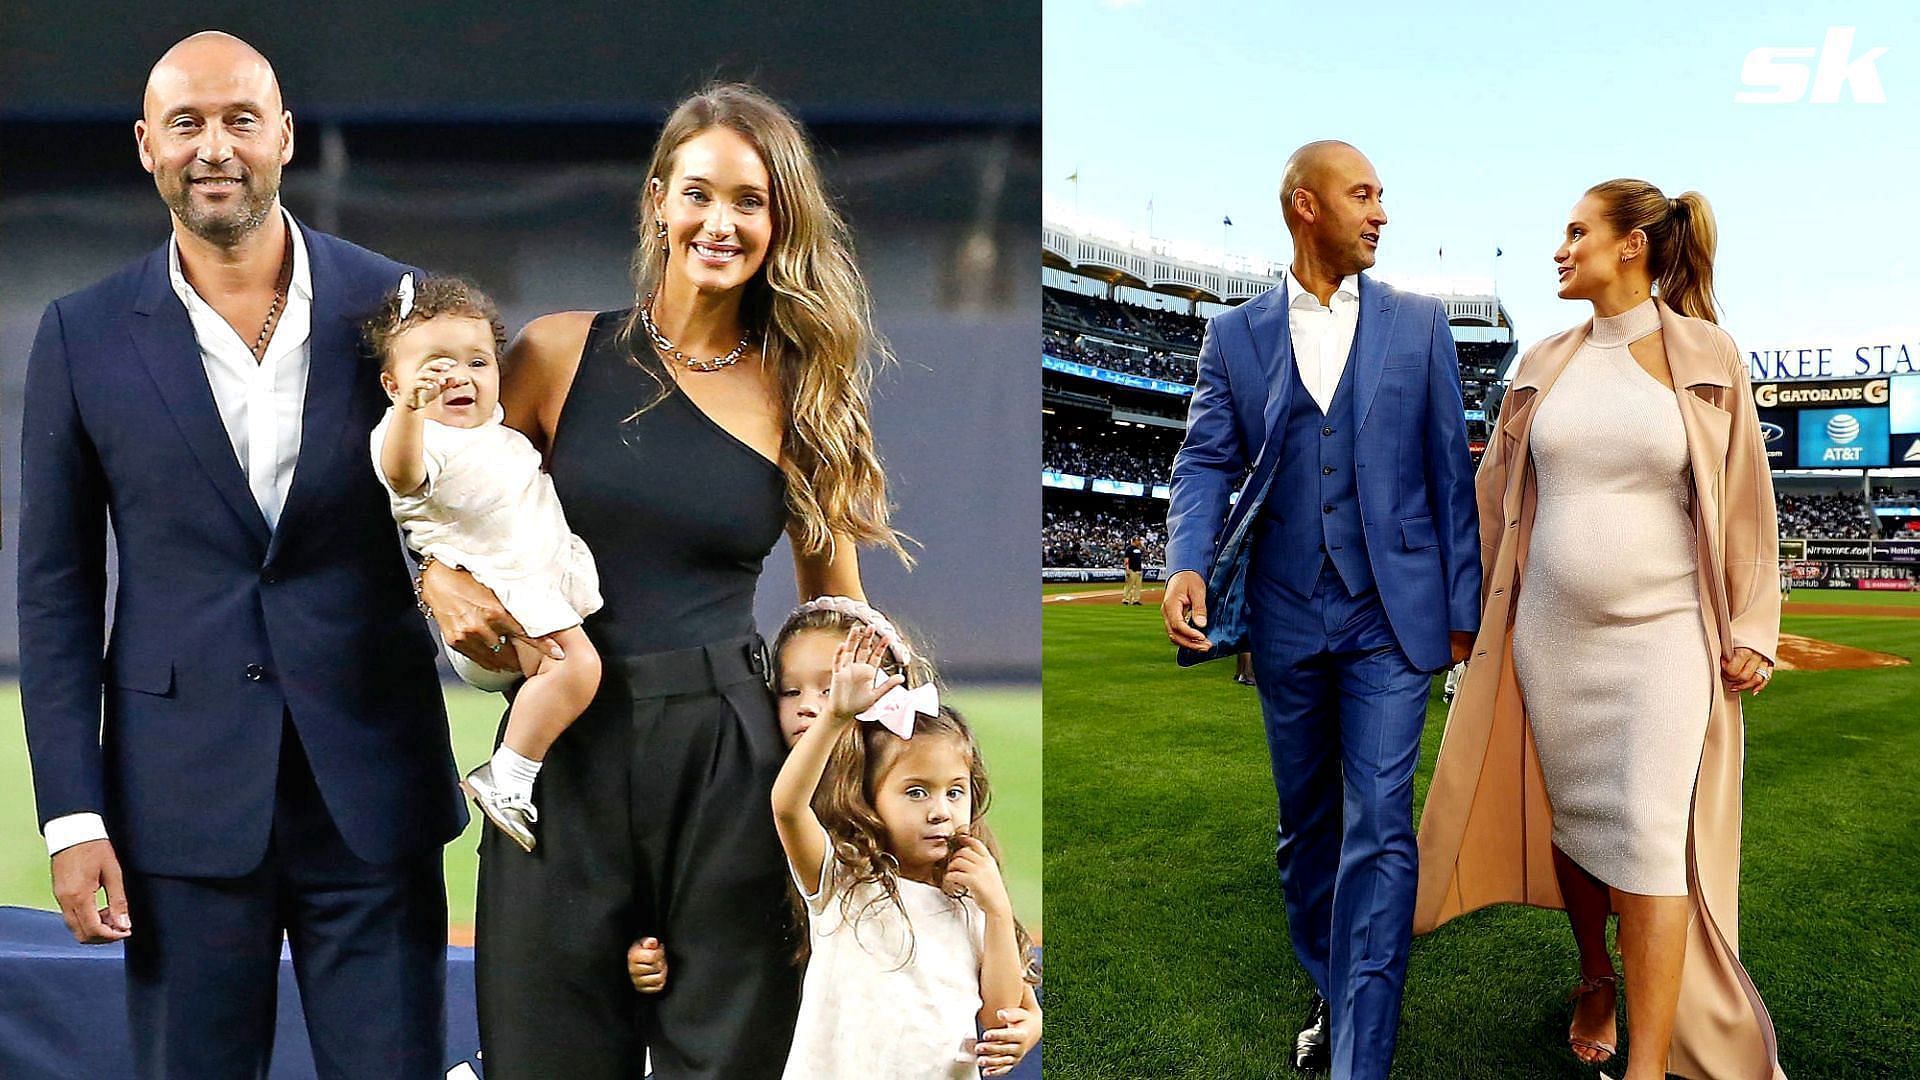 Derek Jeter poses with his Wife Hannah Davis during the retirement ceremony of his number 2 jersey at Yankee Stadium on May 14, 2017 in New York City. (Photo by Al Bello/Getty Images); Derek Jeter with his wife and children at Yankee Stadium for his Hall of Fame Induction Ceremony.